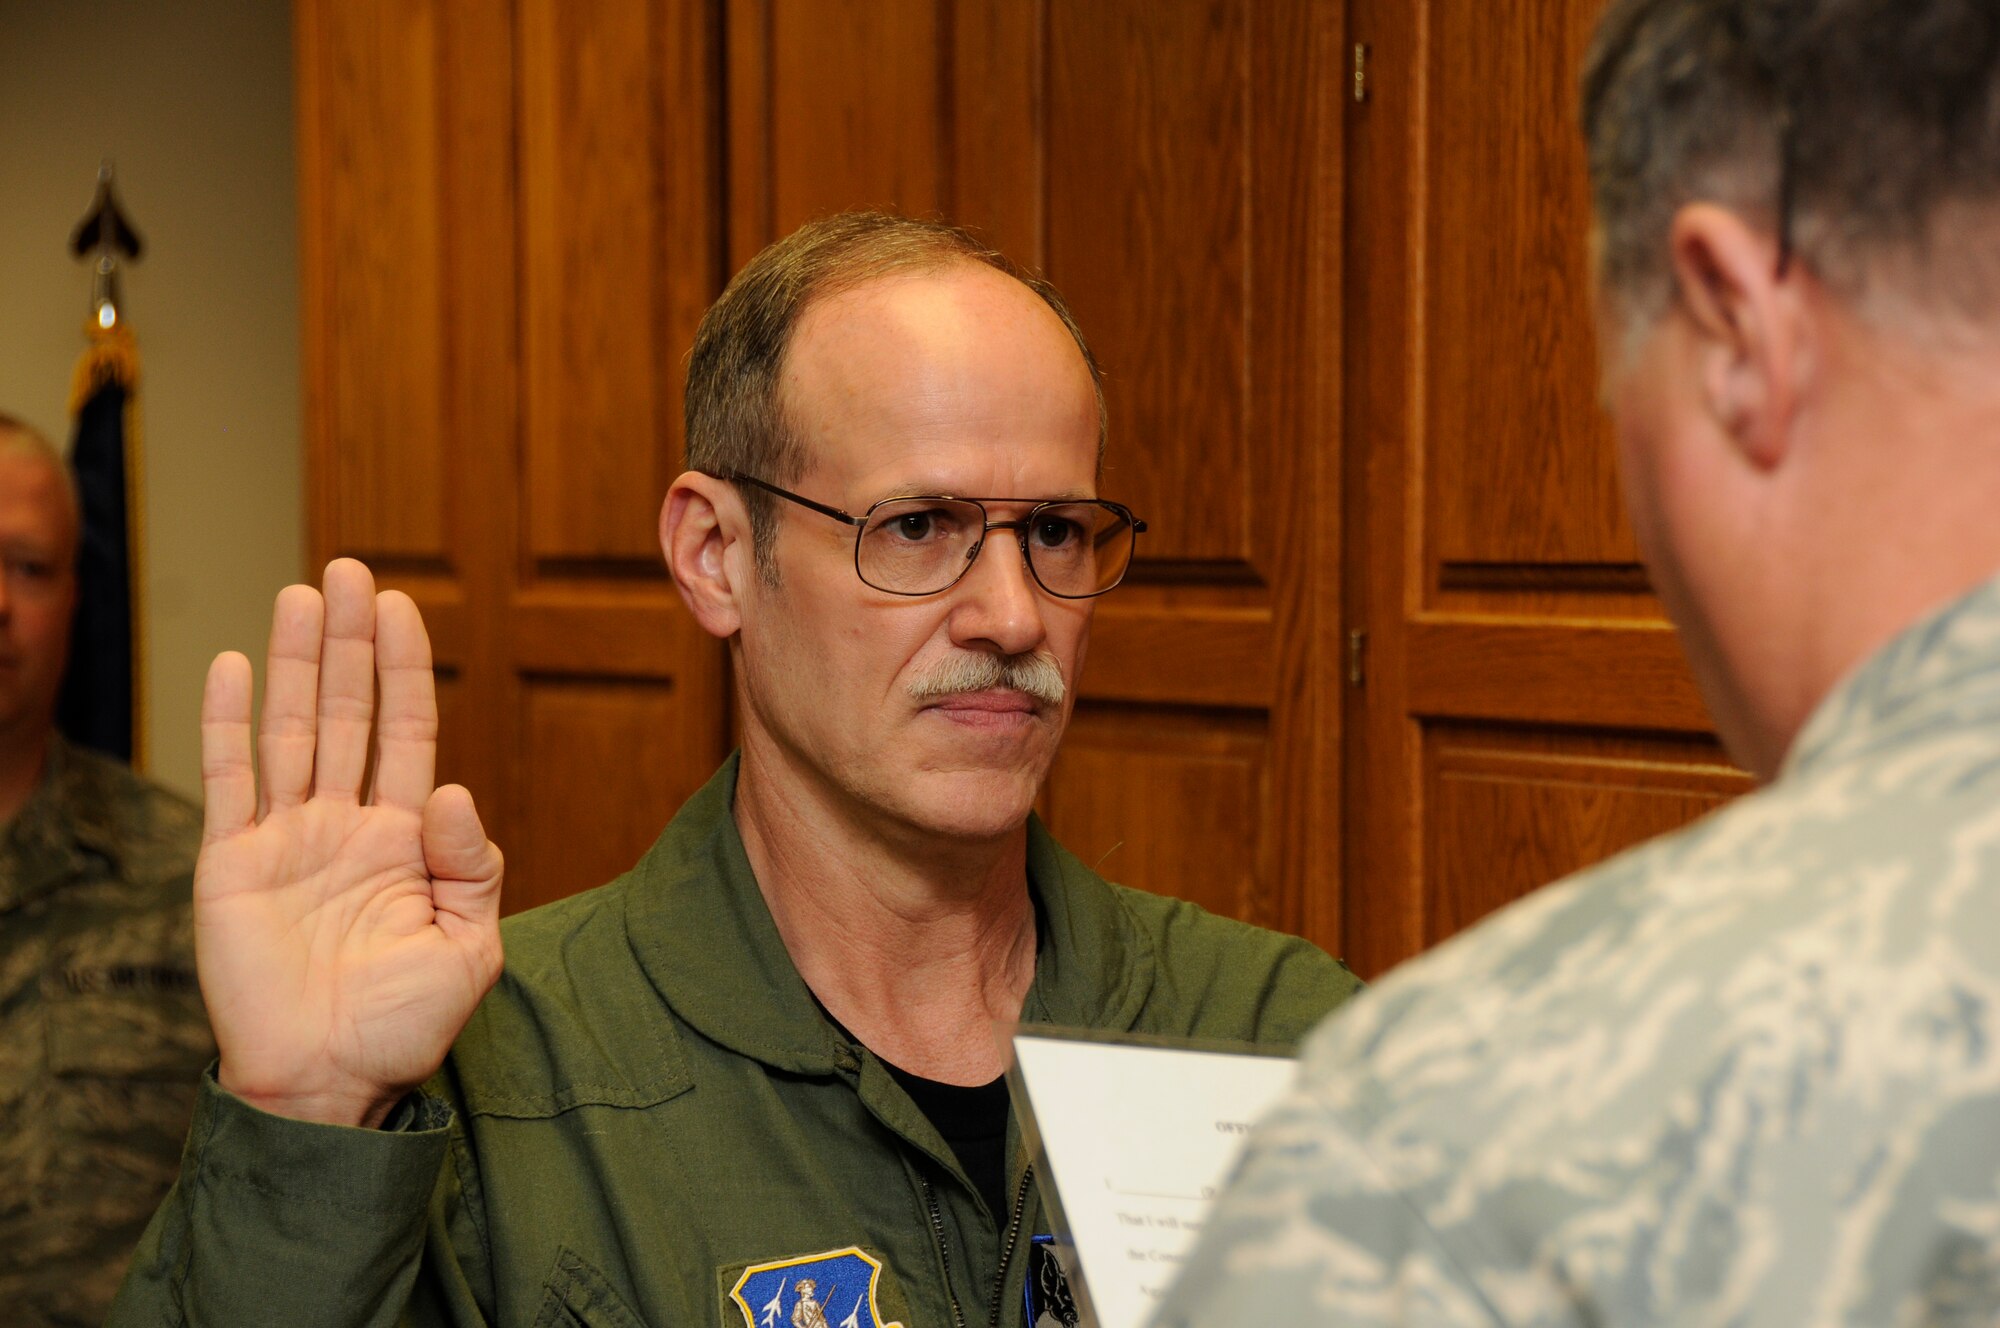 Dr. Glenn Harden, a Physician from Sioux City, Iowa is sworn into the Air National Guard at the 185th, Air Refueling Wing on May 1, 2010 in Sioux City, Iowa. Dr Harden will work as the flight surgeon here at the 185th ARW medical clinic.
Air Force Photo By: Tech Sgt Oscar Sanchez
